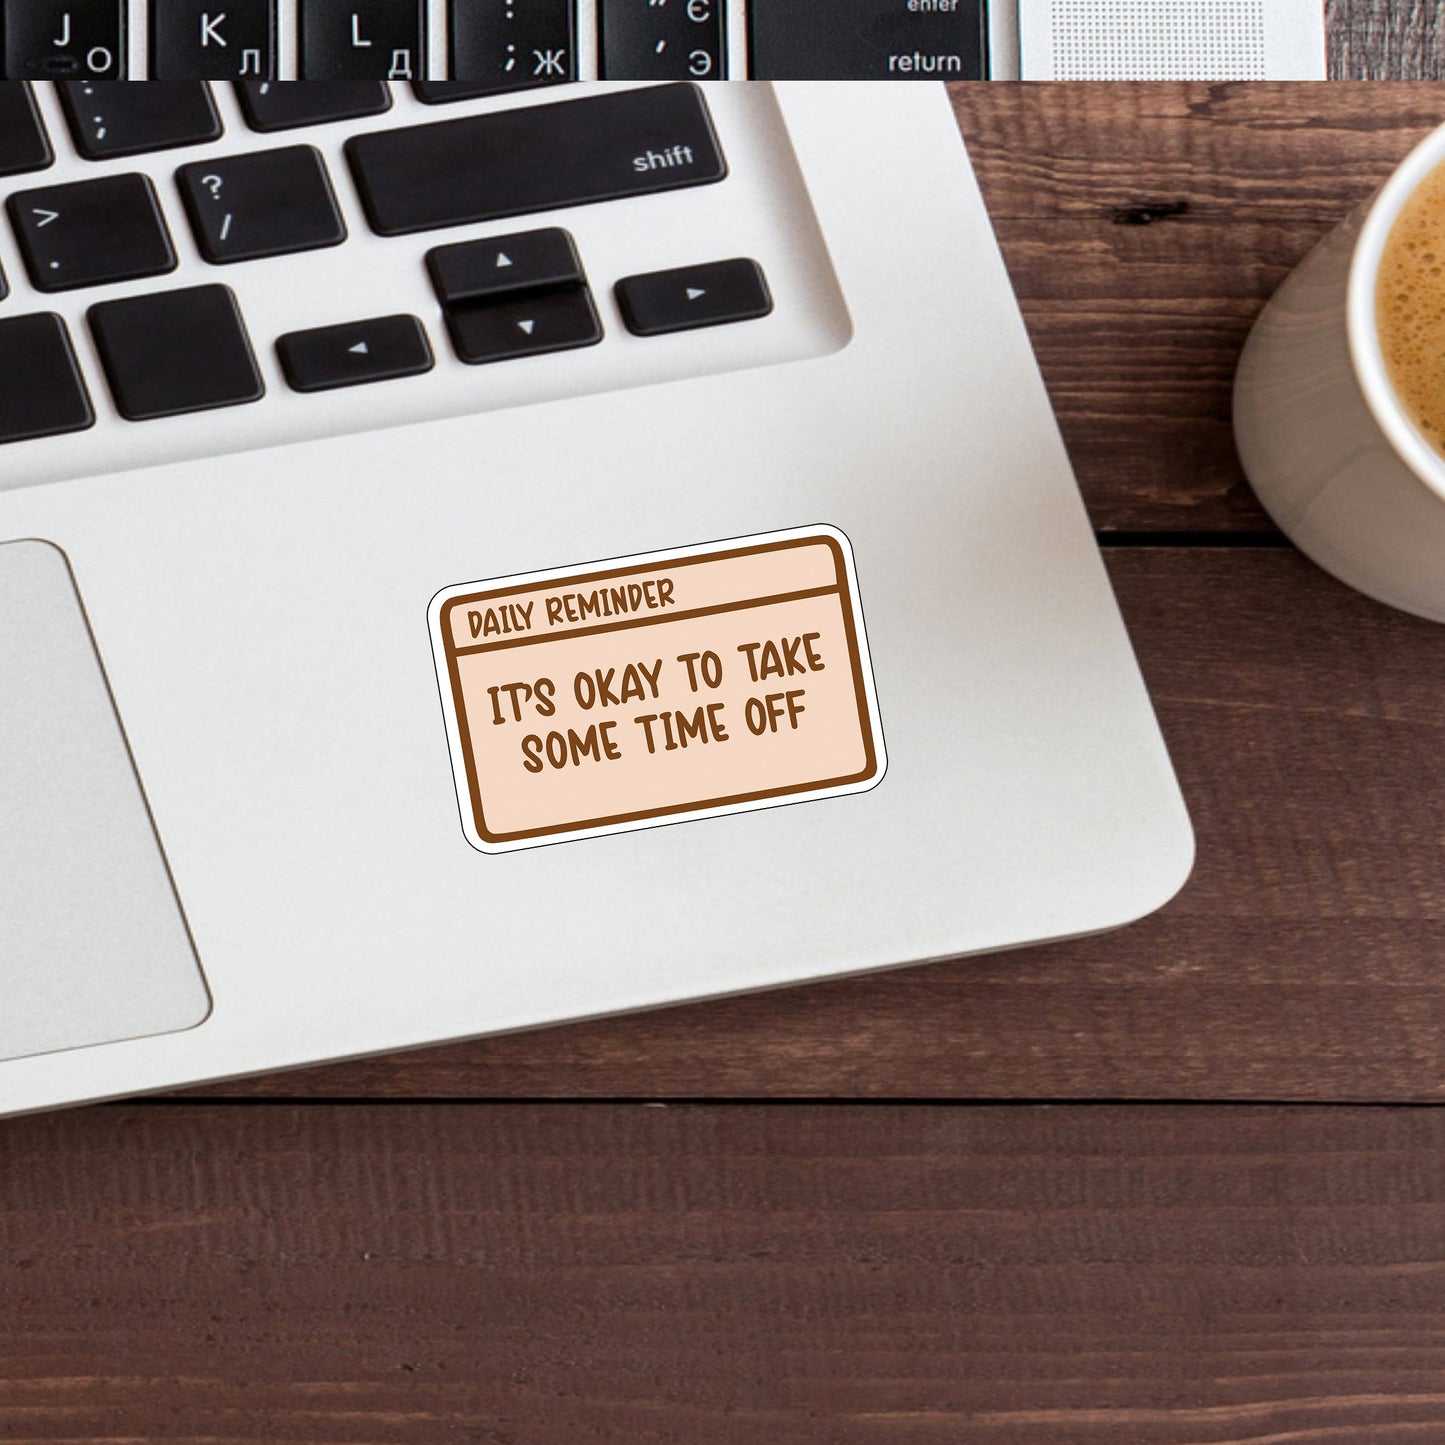 Take Some Time OFf, Express Yourself with our Unique Vinyl Stickers for Laptops, Tablets, and More!